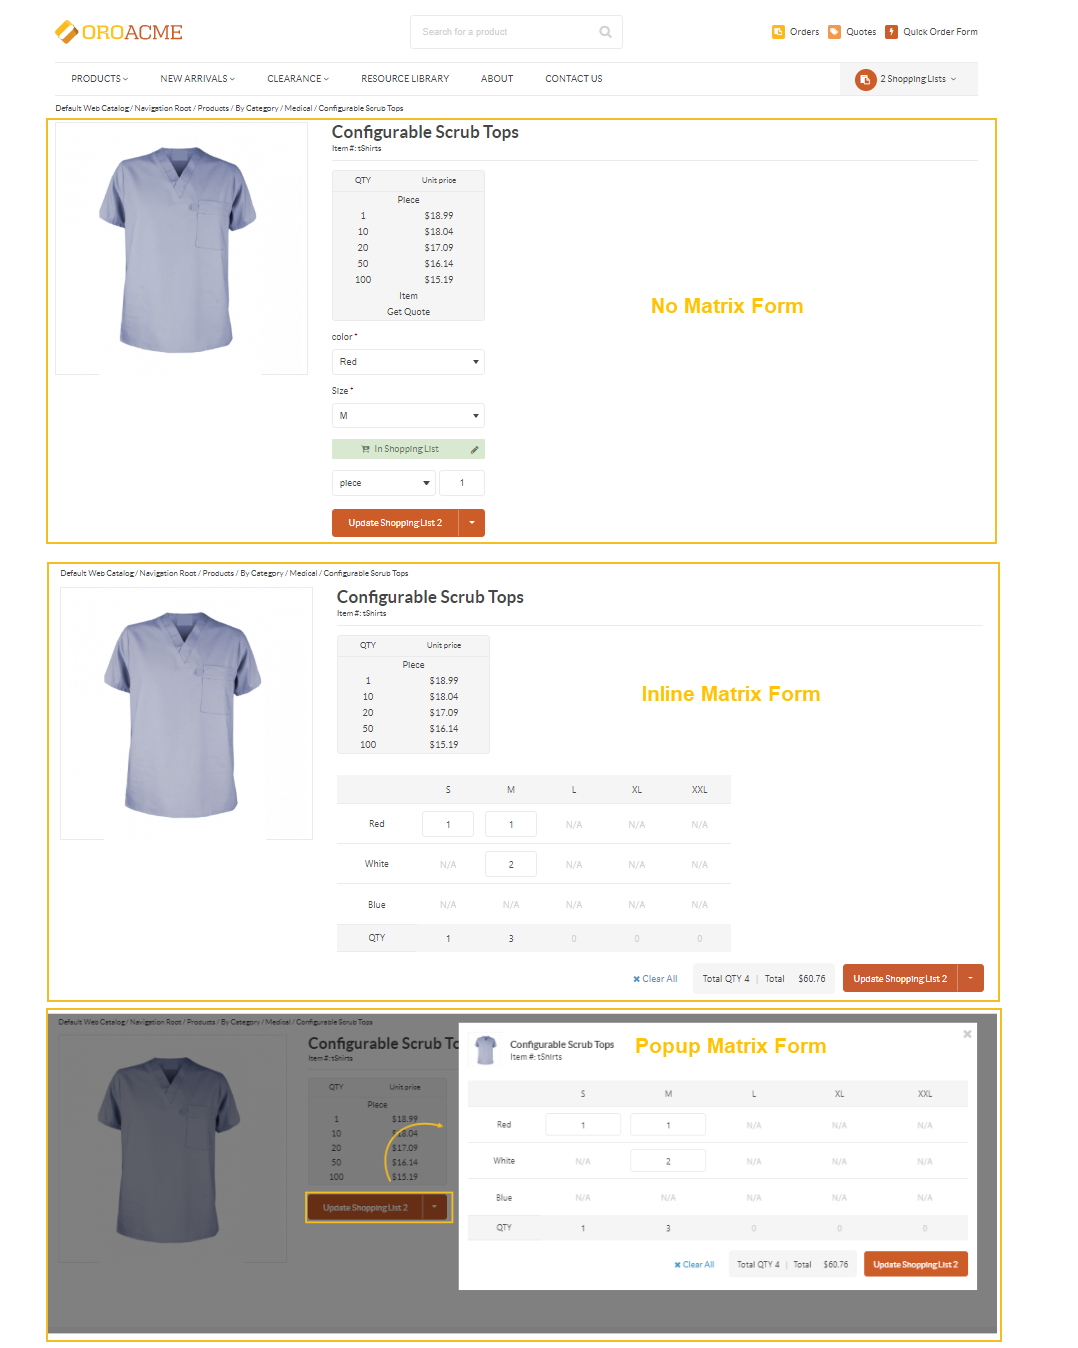 Different matrix form view options displayed on the product page in the storefront